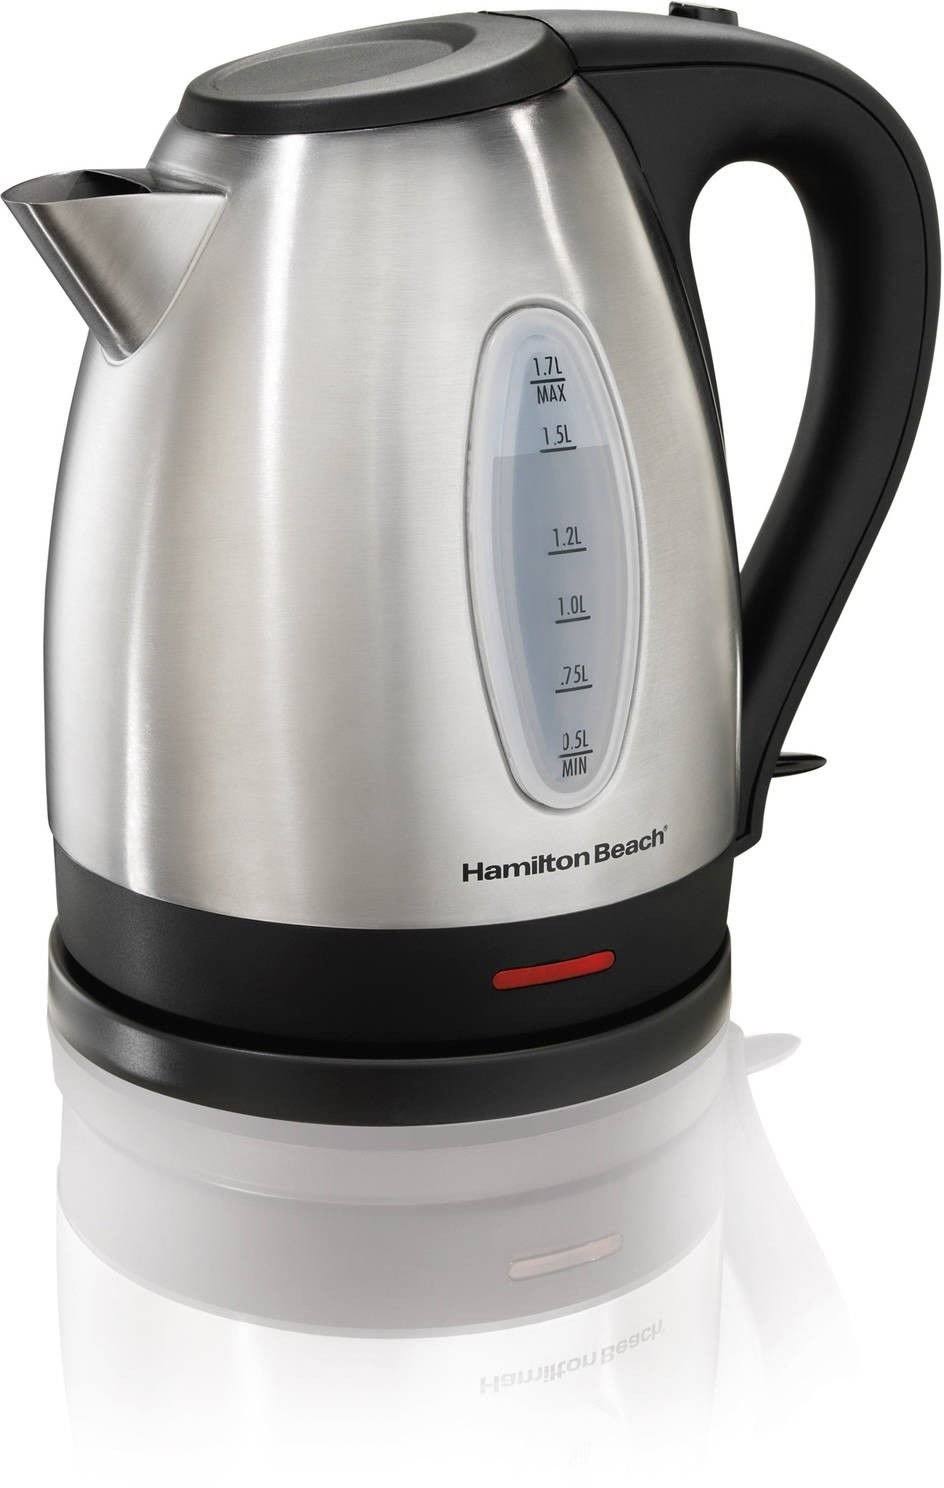 Hamilton Beach Electric Kettle - Stainless Steel, 1.7l